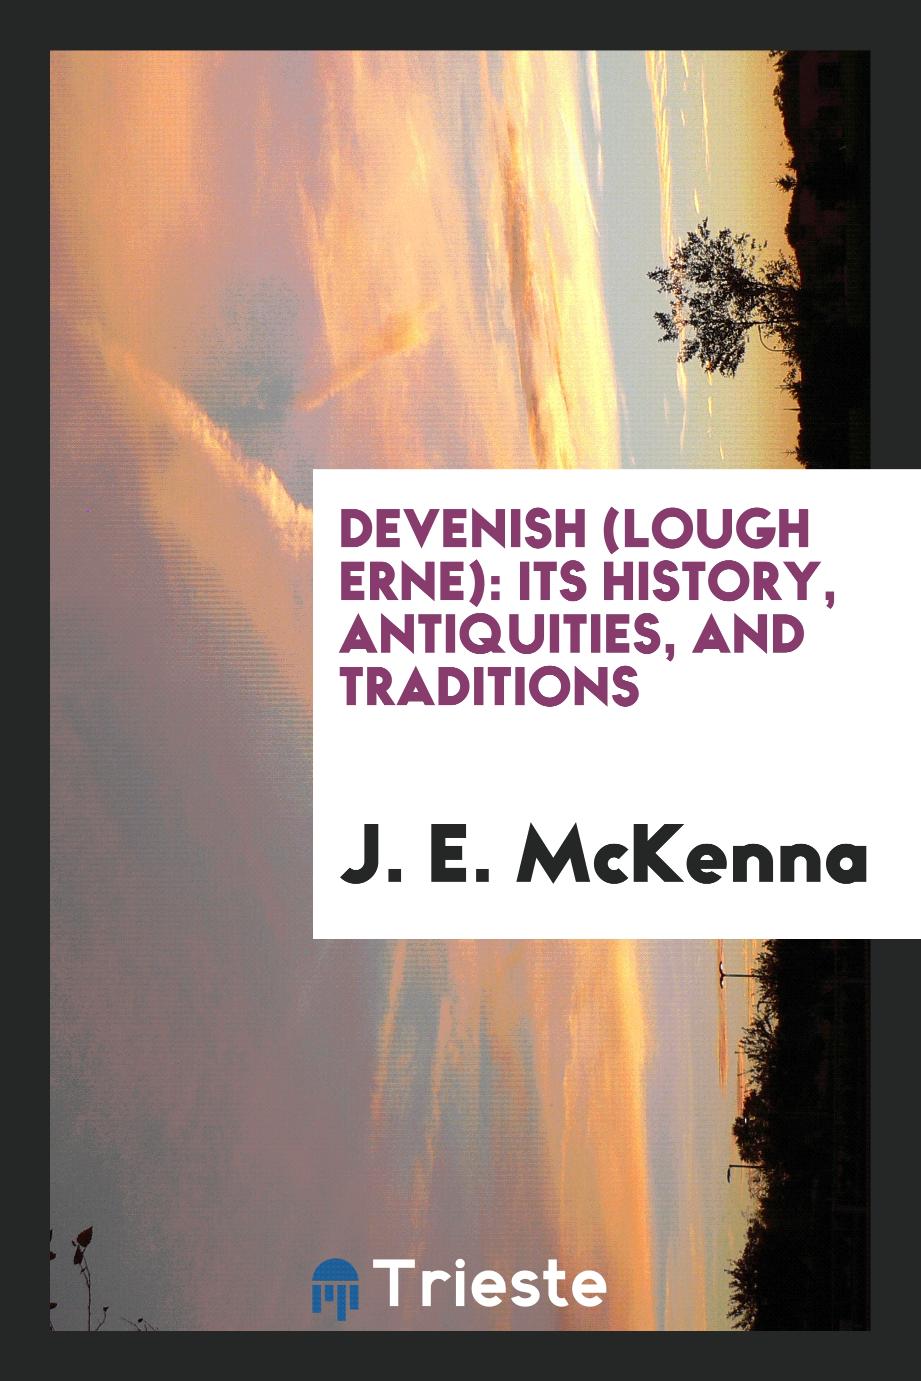 Devenish (Lough Erne): Its History, Antiquities, and Traditions